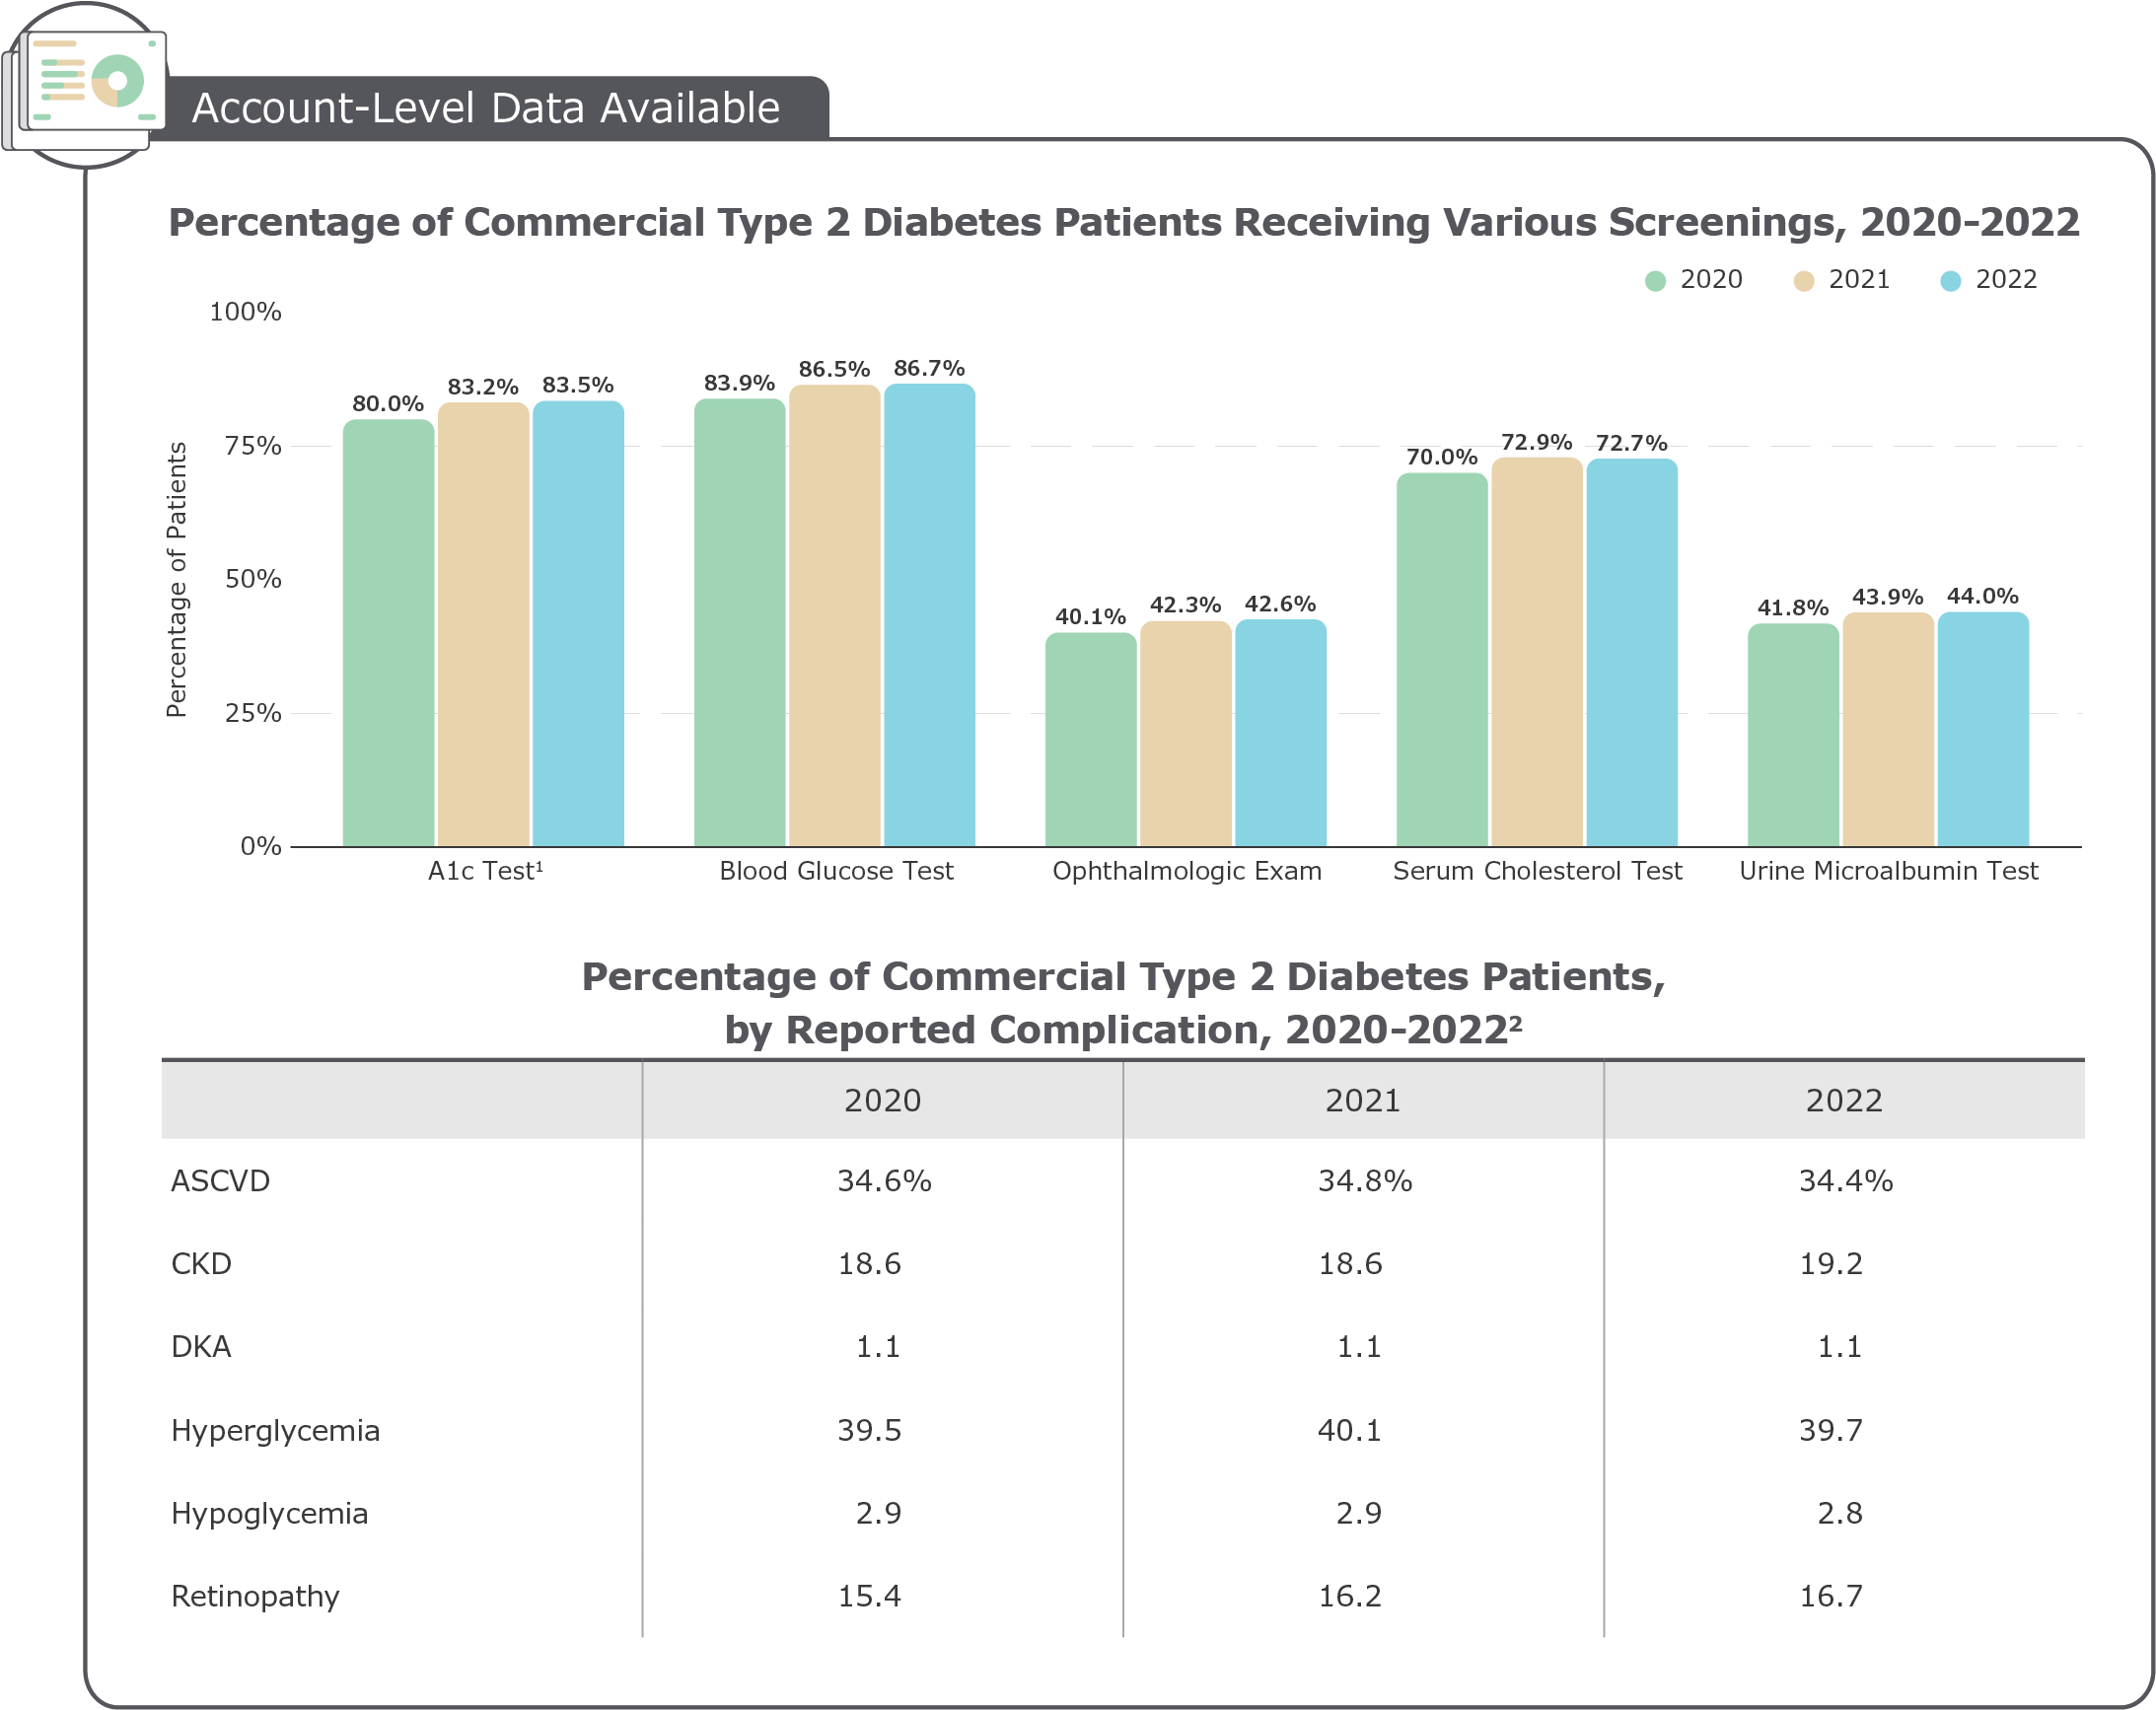 Distribution of All-Payer Inpatient and Outpatient Cases, 2020 and 2021